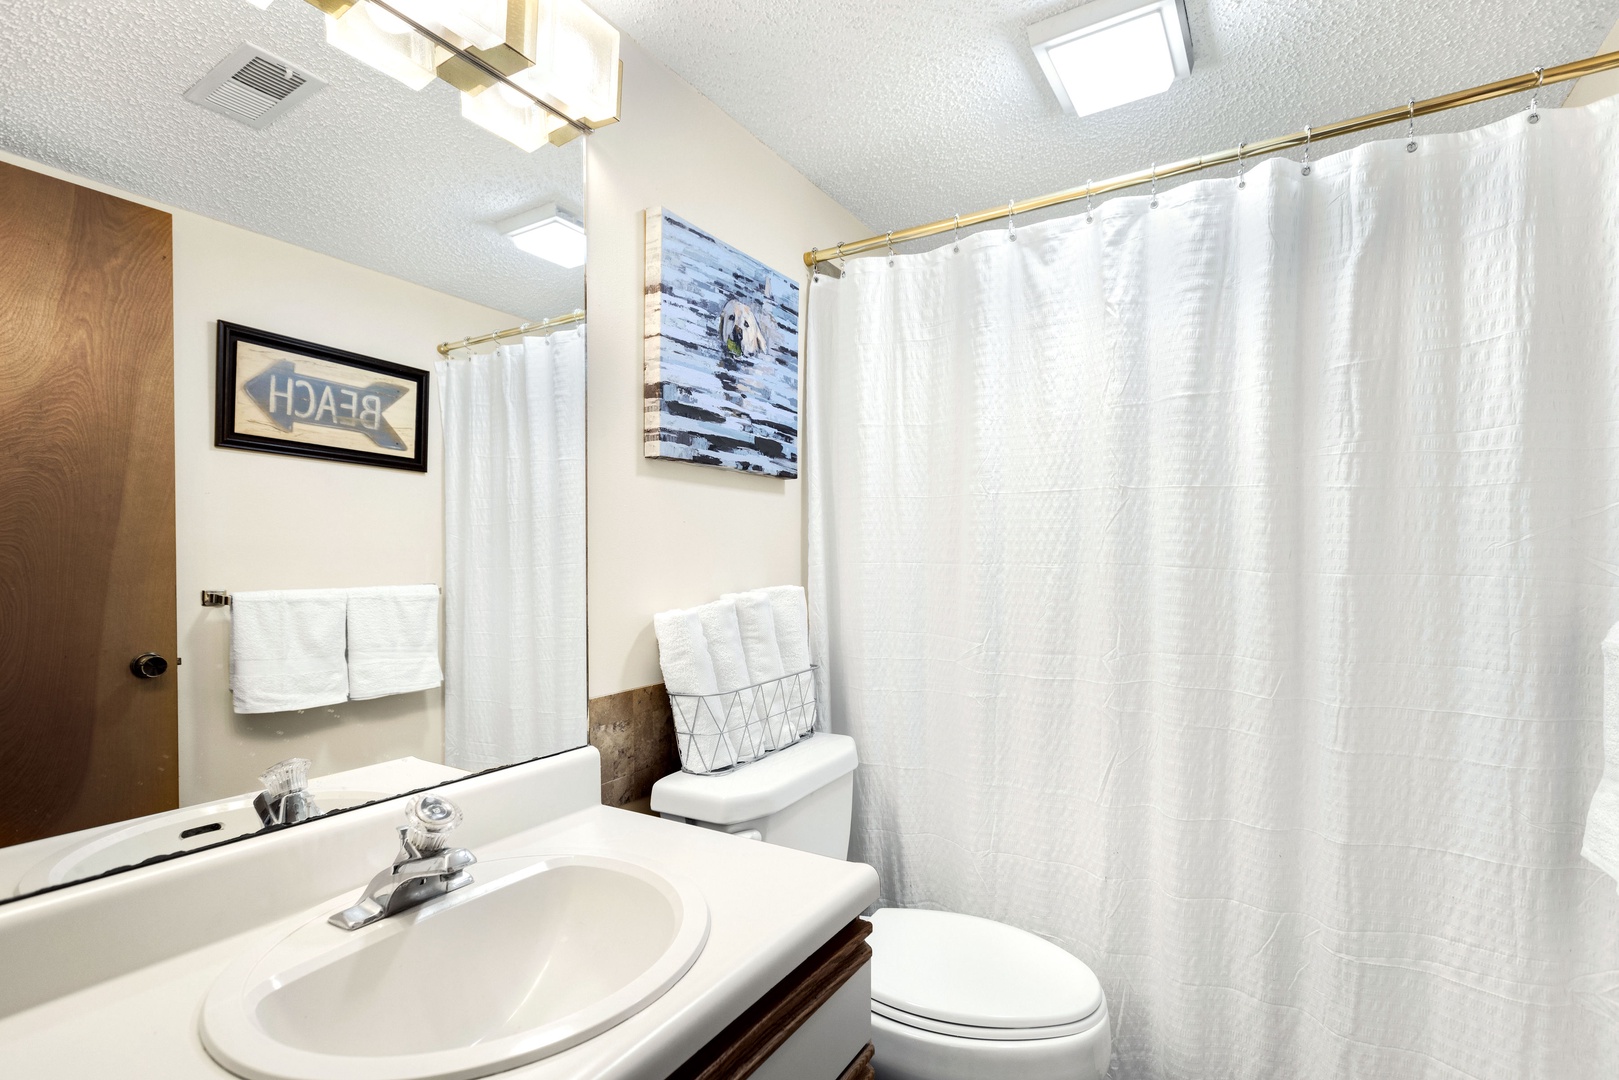 The shared full bathroom features a single vanity & shower-tub combination